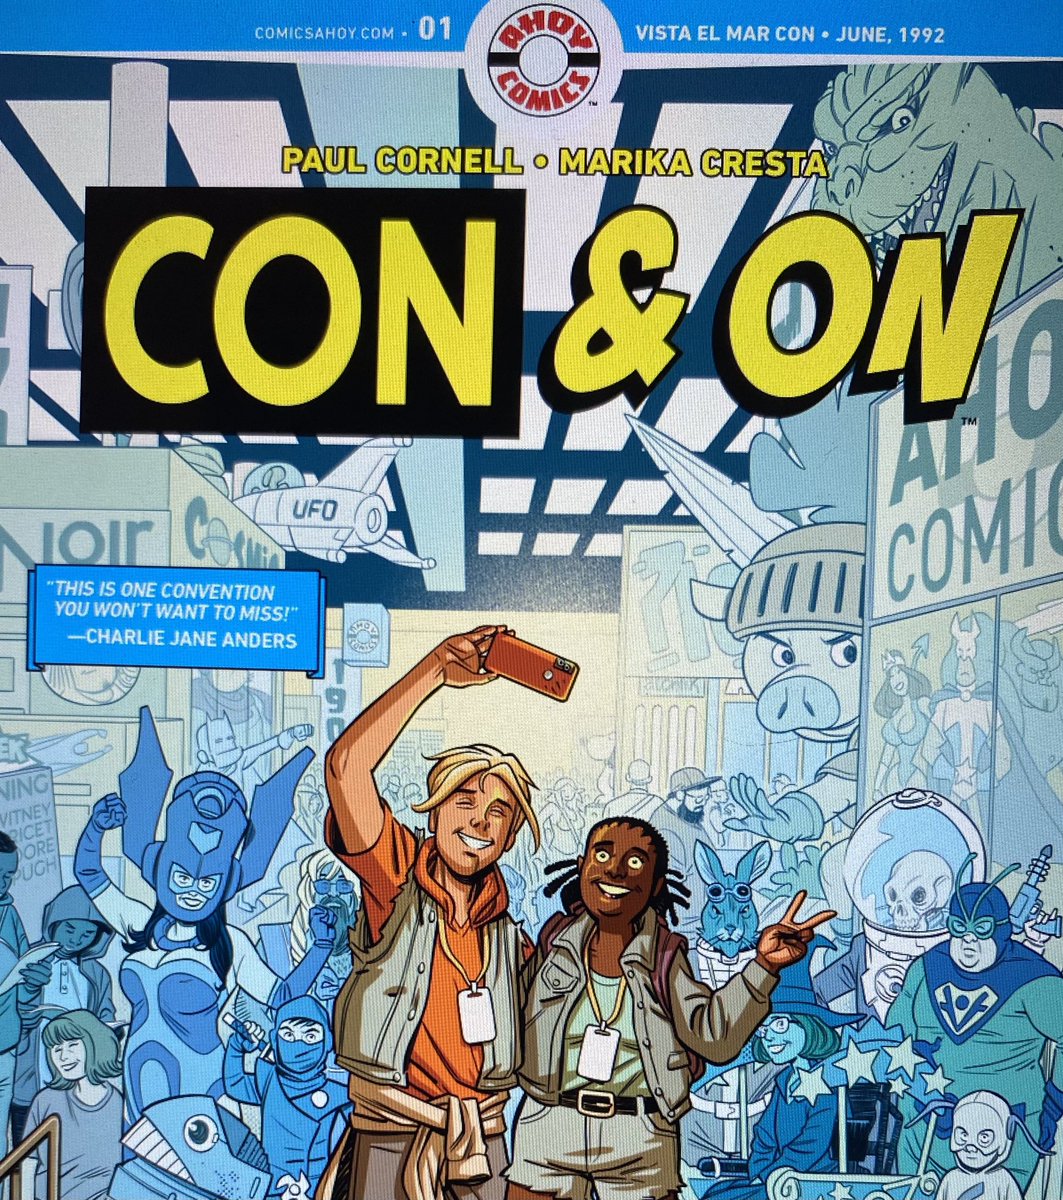 Cohost @JasonDKim3 recomemded this one to me - a super fun celebration of comic conventions from @AhoyComicMags @MarikaCresta #paulcornell